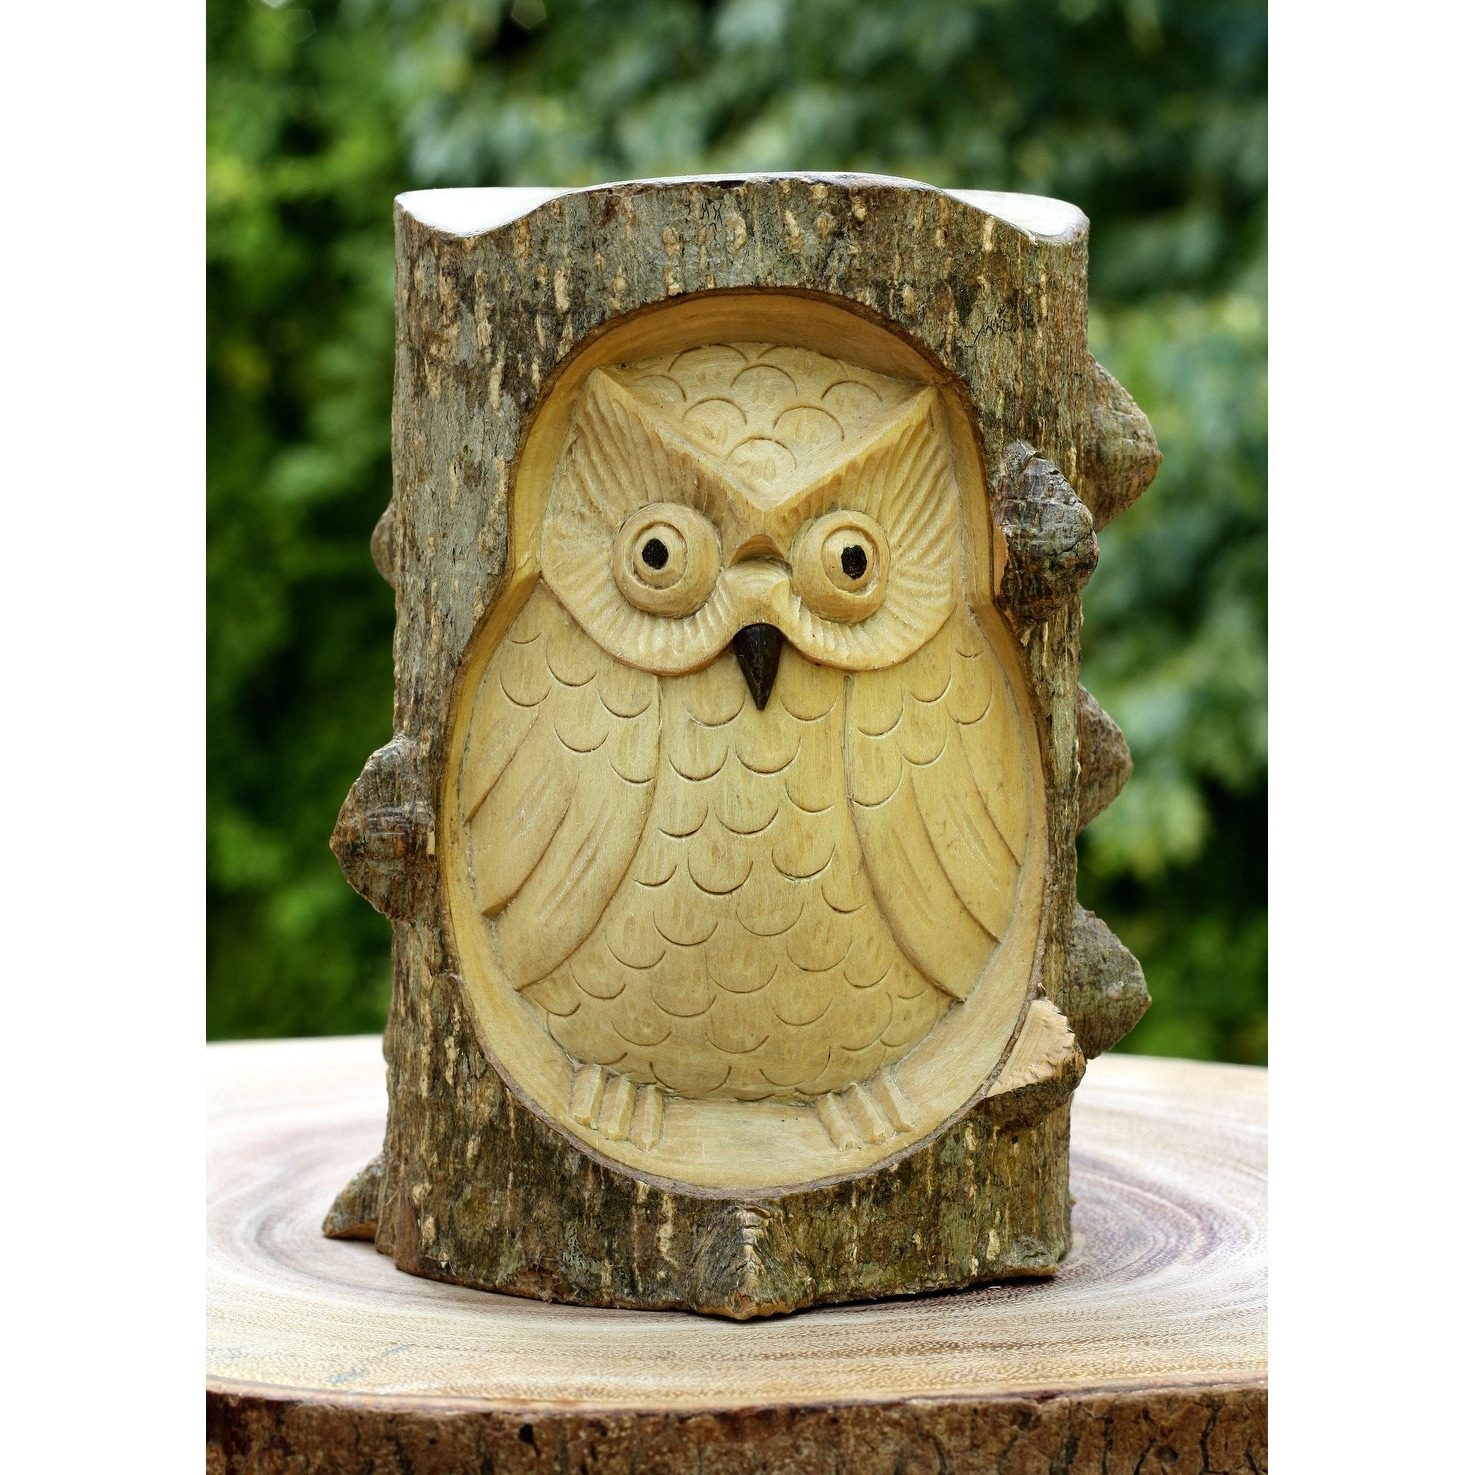 Vintage Hand Carved Hand Crafted Owl Wood Figurine 6 1/2 Inches Tall Free USA Shipping